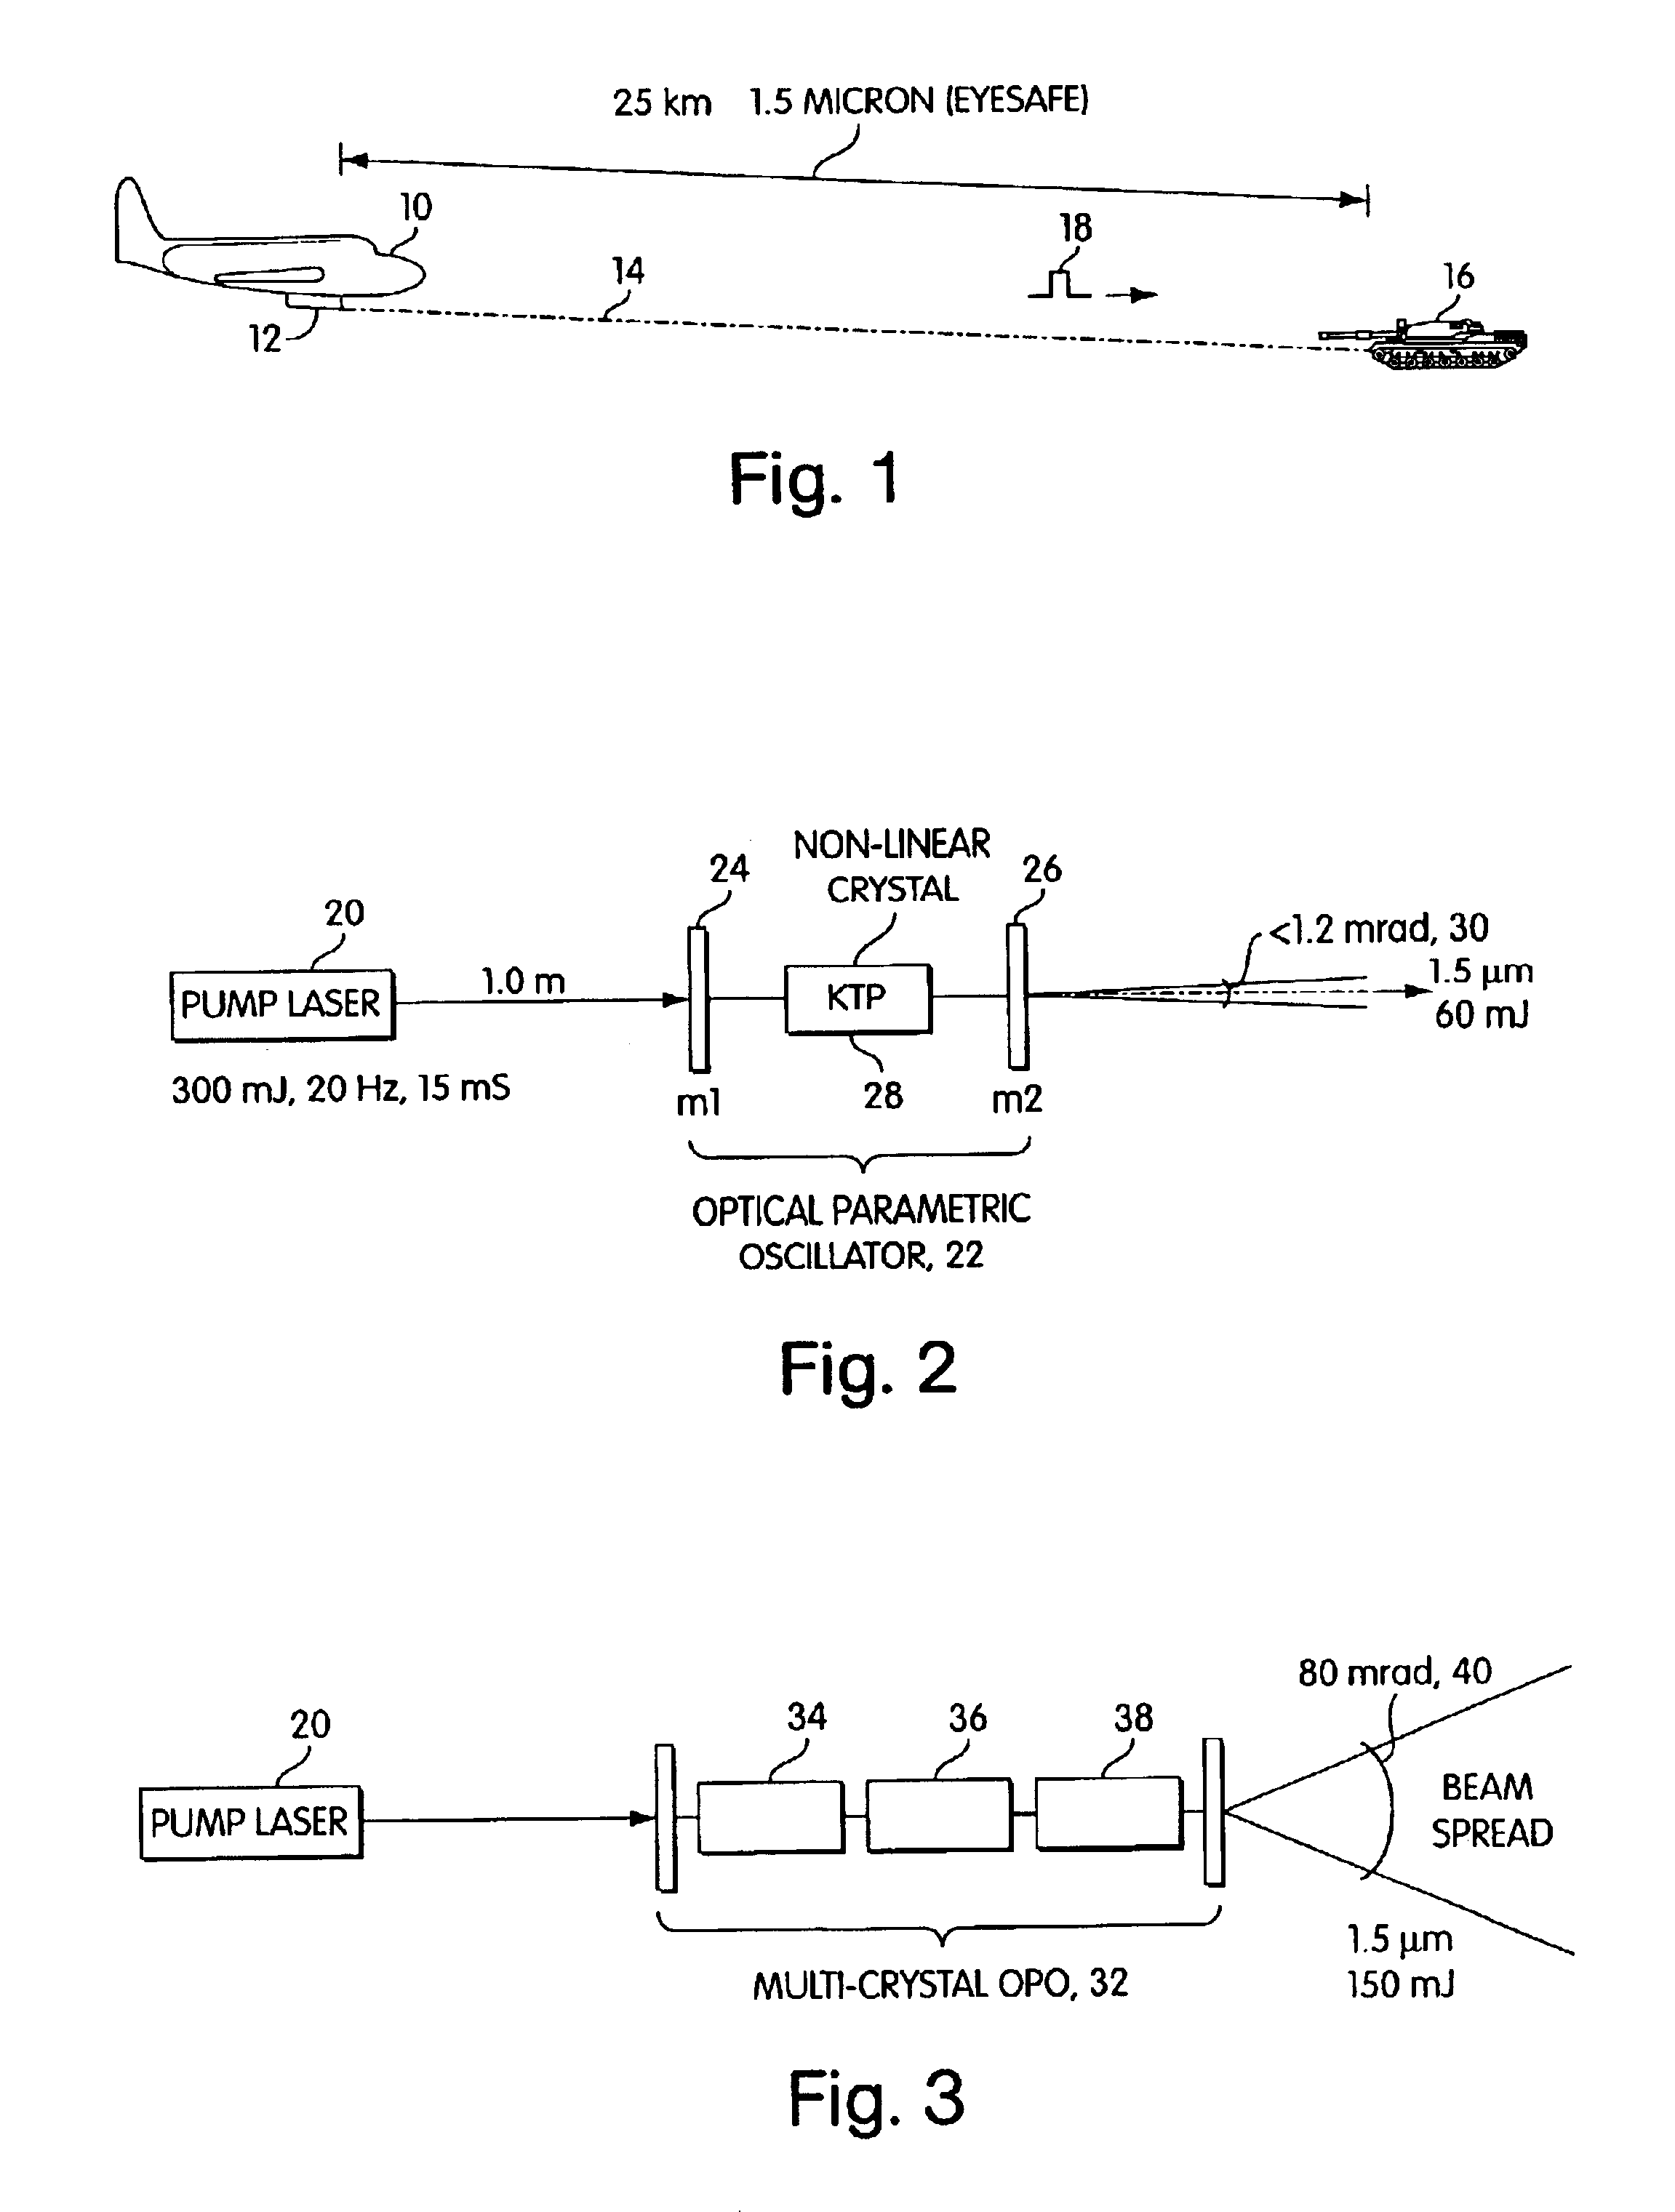 Method and apparatus for increasing the intensity of an eye safe laser